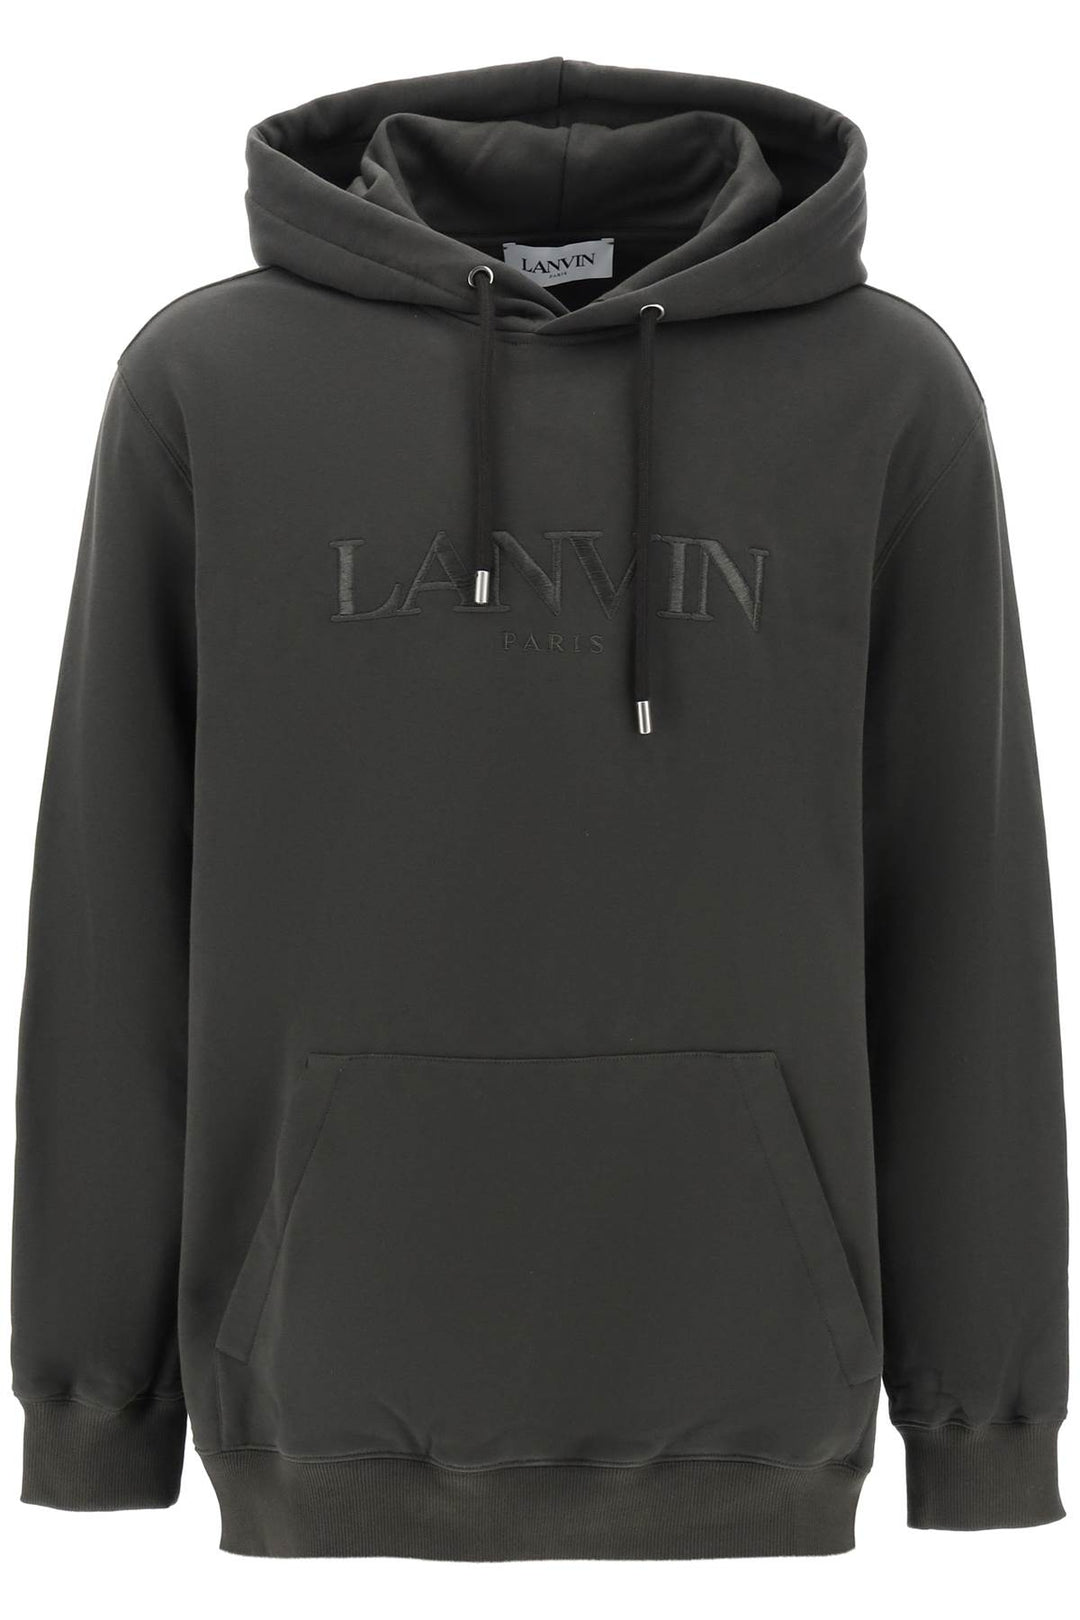 Lanvin Hoodie With Curb Embroidery   Verde